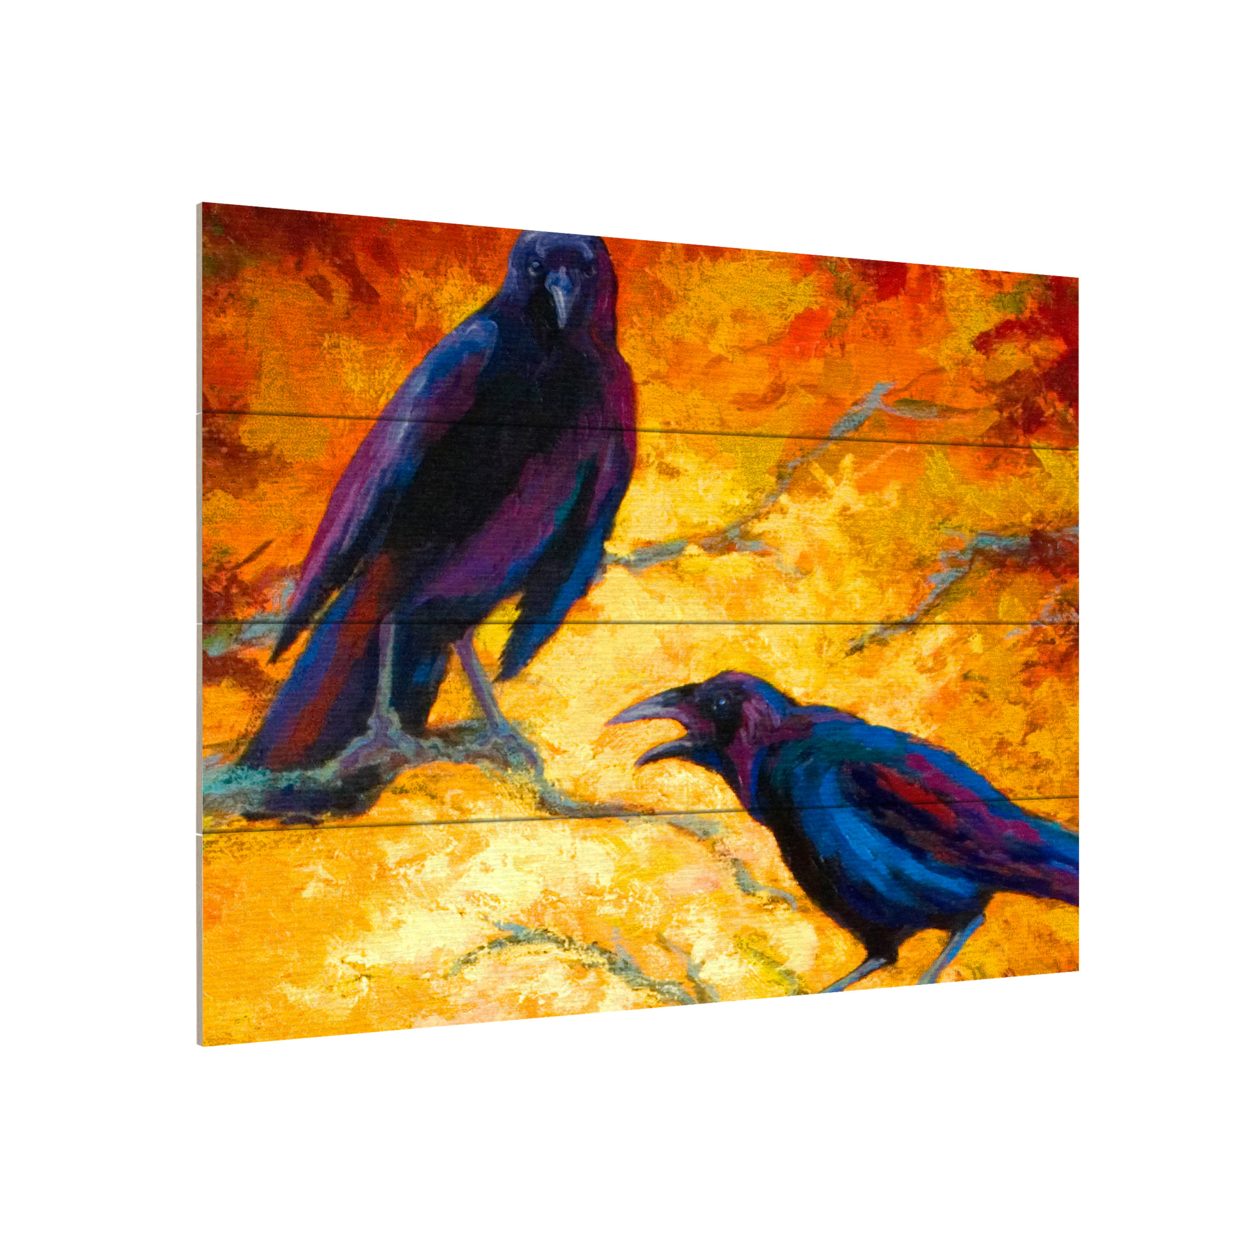 Wall Art 12 X 16 Inches Titled Crows 9 Ready To Hang Printed On Wooden Planks